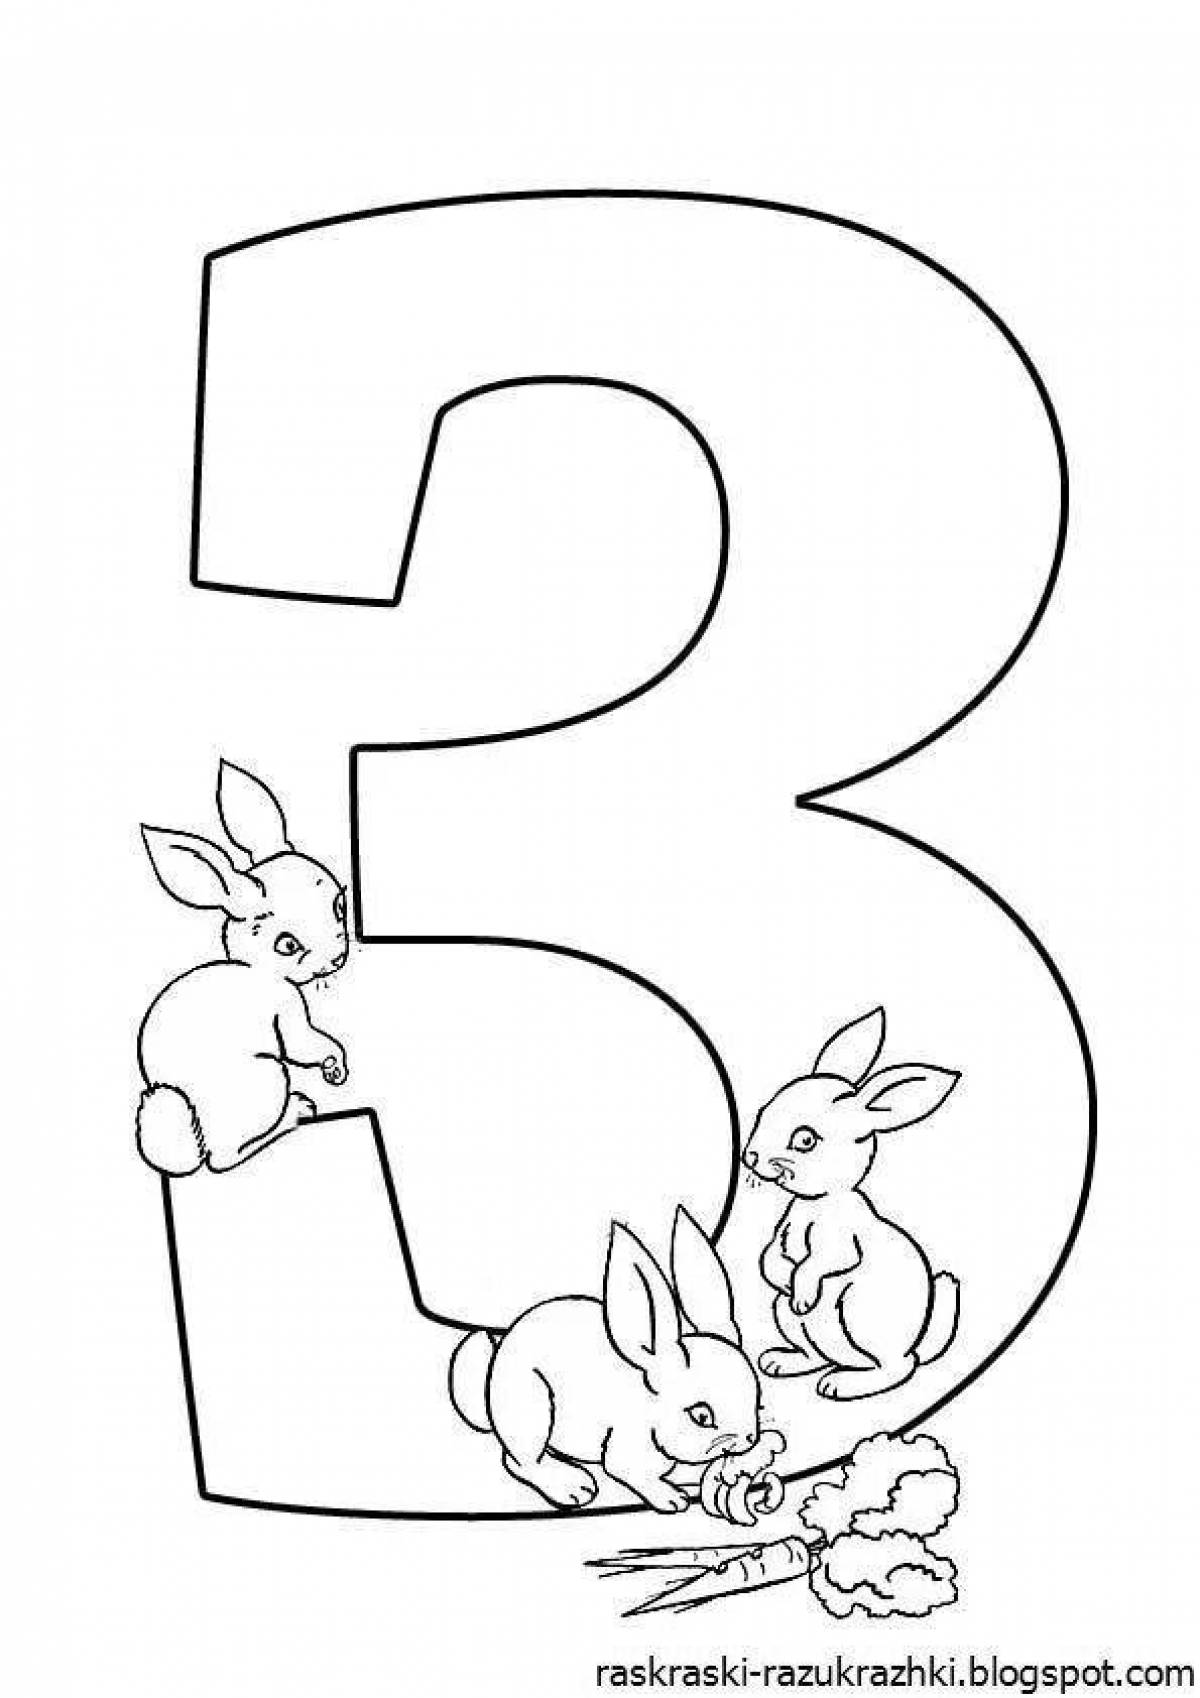 Adorable coloring book #3 for kids